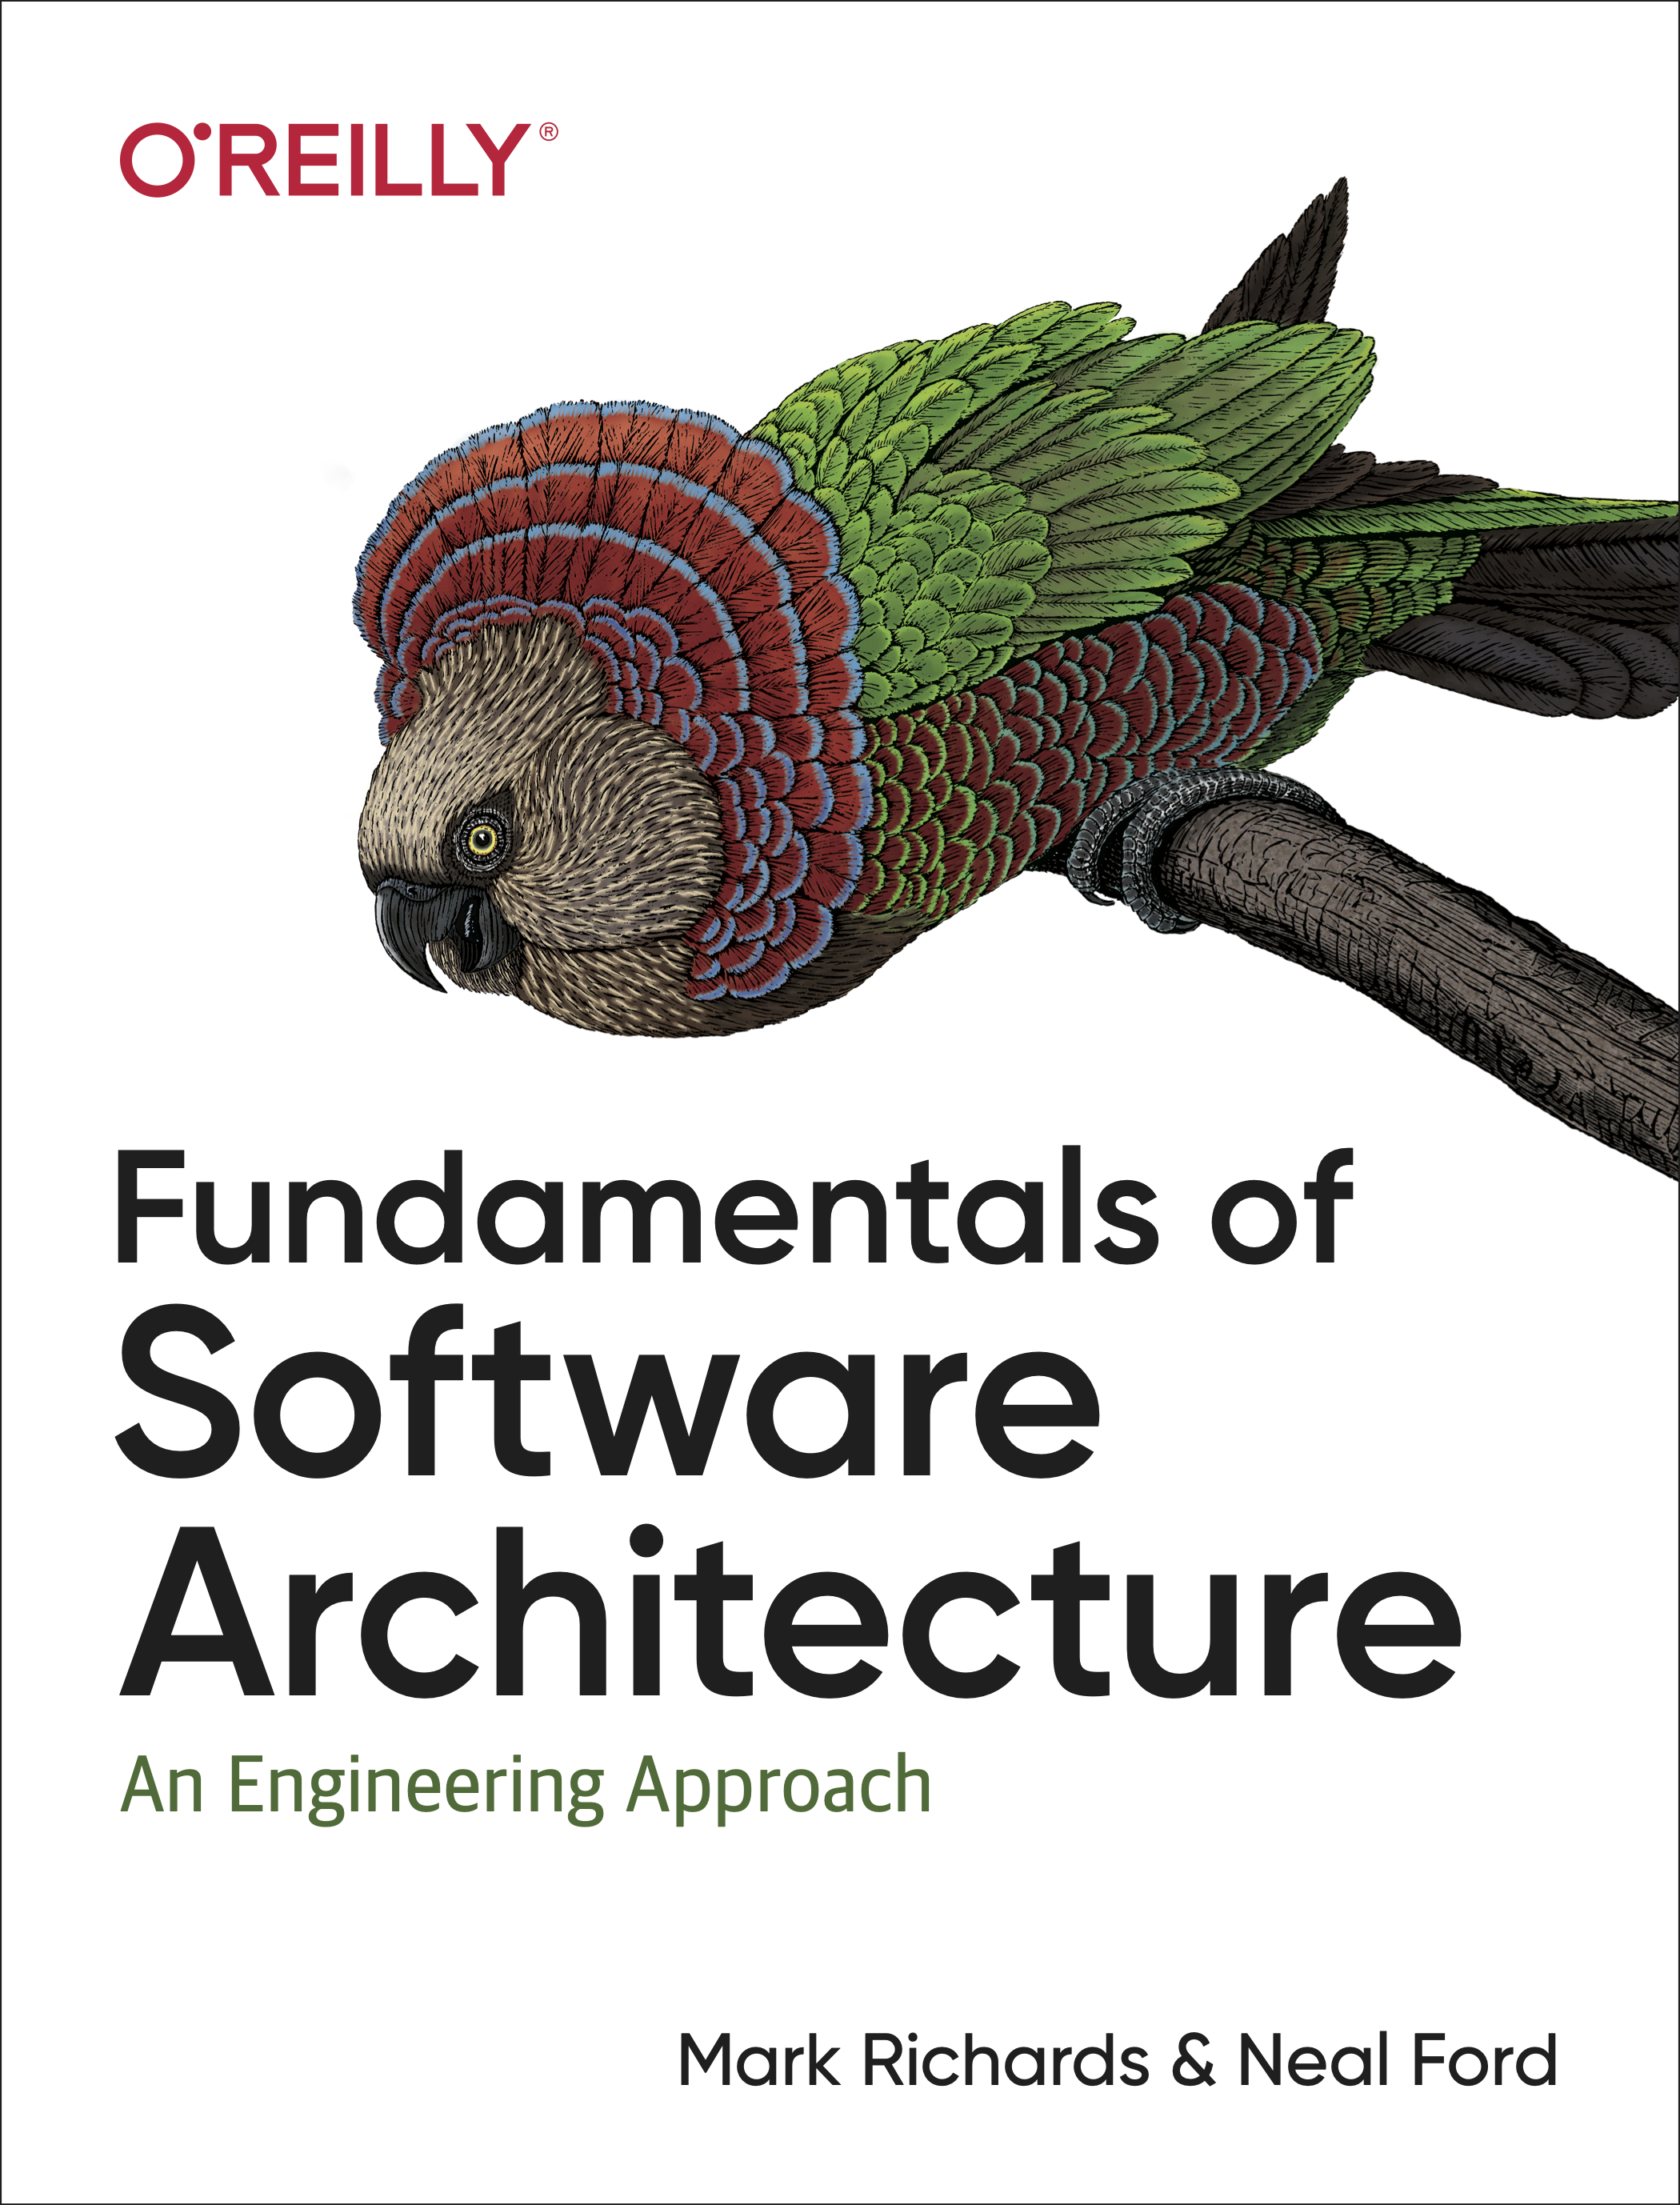 Cover for Fundamentals of Software Architecture book